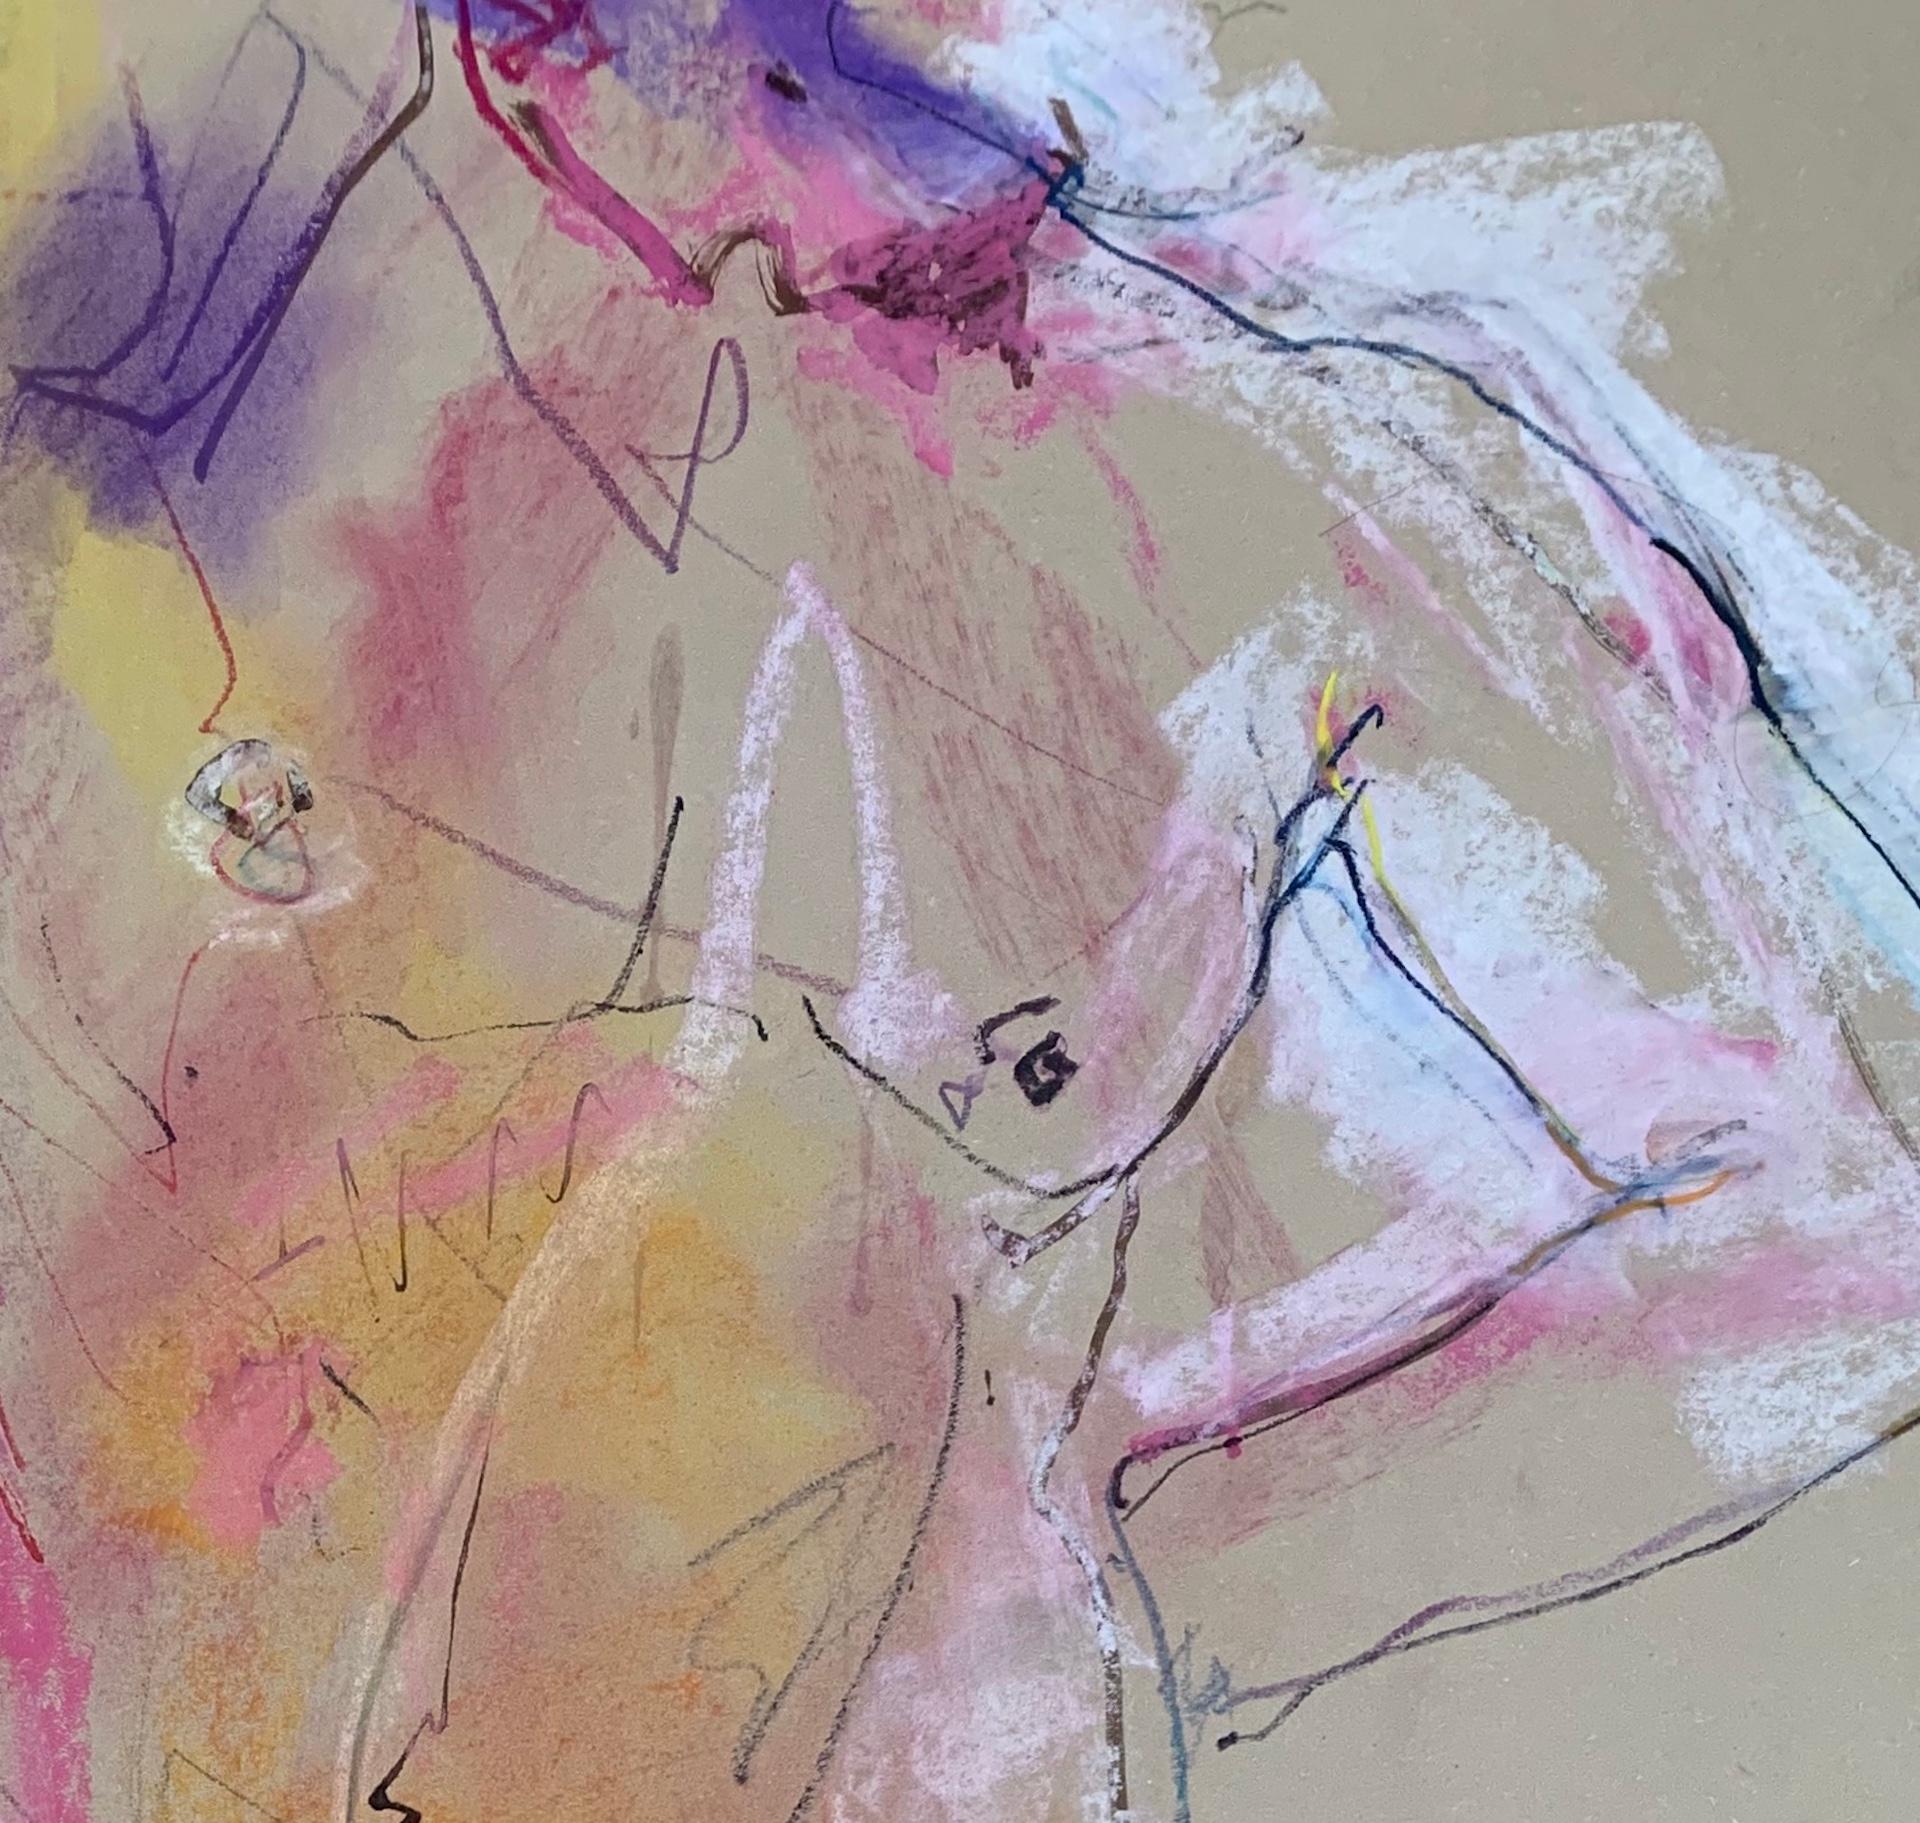 Judith Brenner
Alberto Standing 2
Original Figurative Painting
Mixed Media on Paper
Size: H 84.1cm x W 59.4cm x D 0.1cm
Sold Unframed
Please note that insitu images are purely an indication of how a piece may look.

Alberto Standing 2 is a